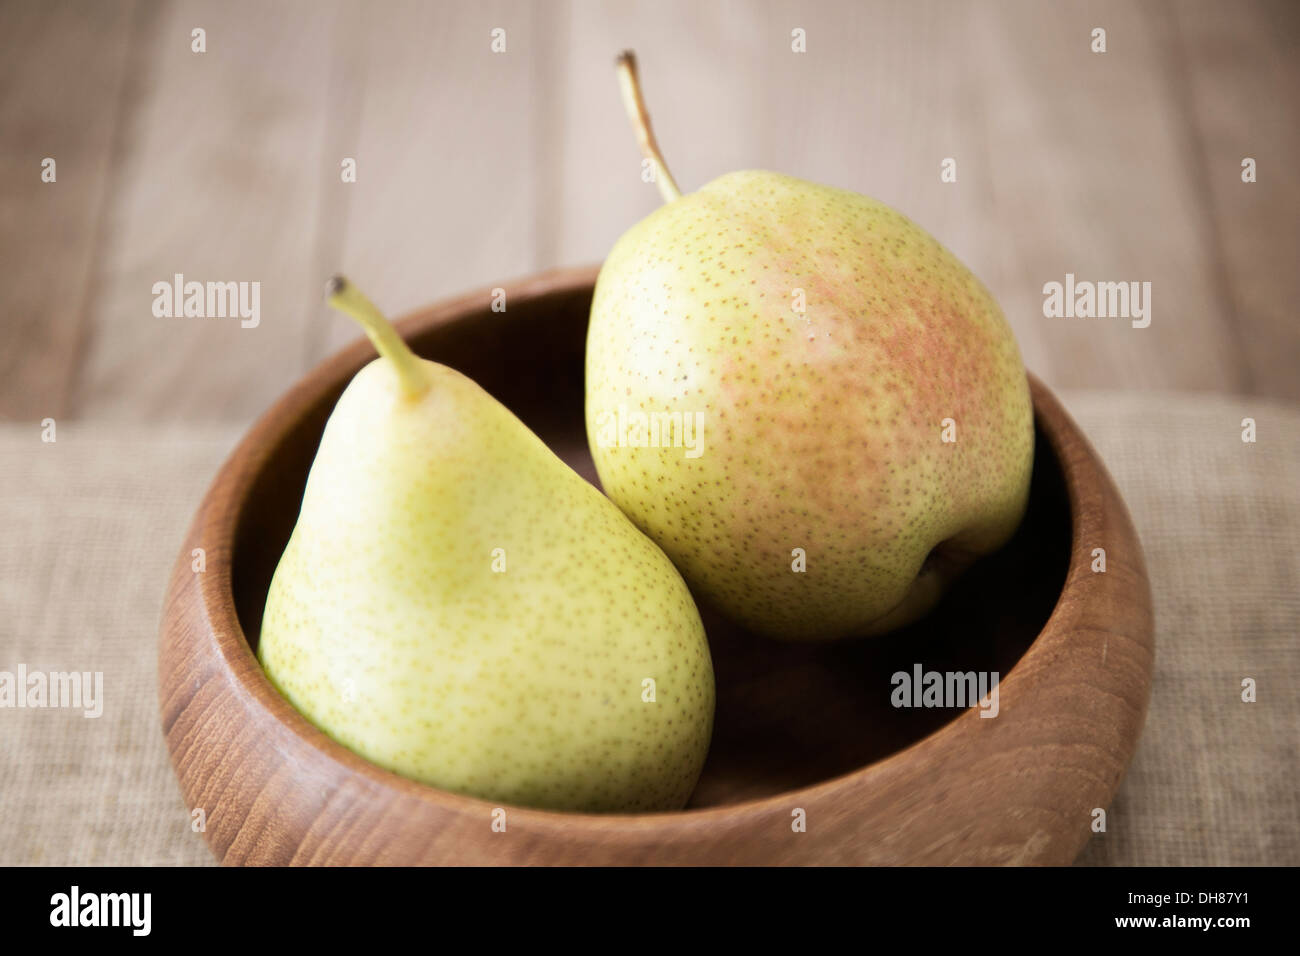 Two pears with mottled pale green skin tinged with pink in a wooden bowl with a linen cloth on a wooden surface Stock Photo